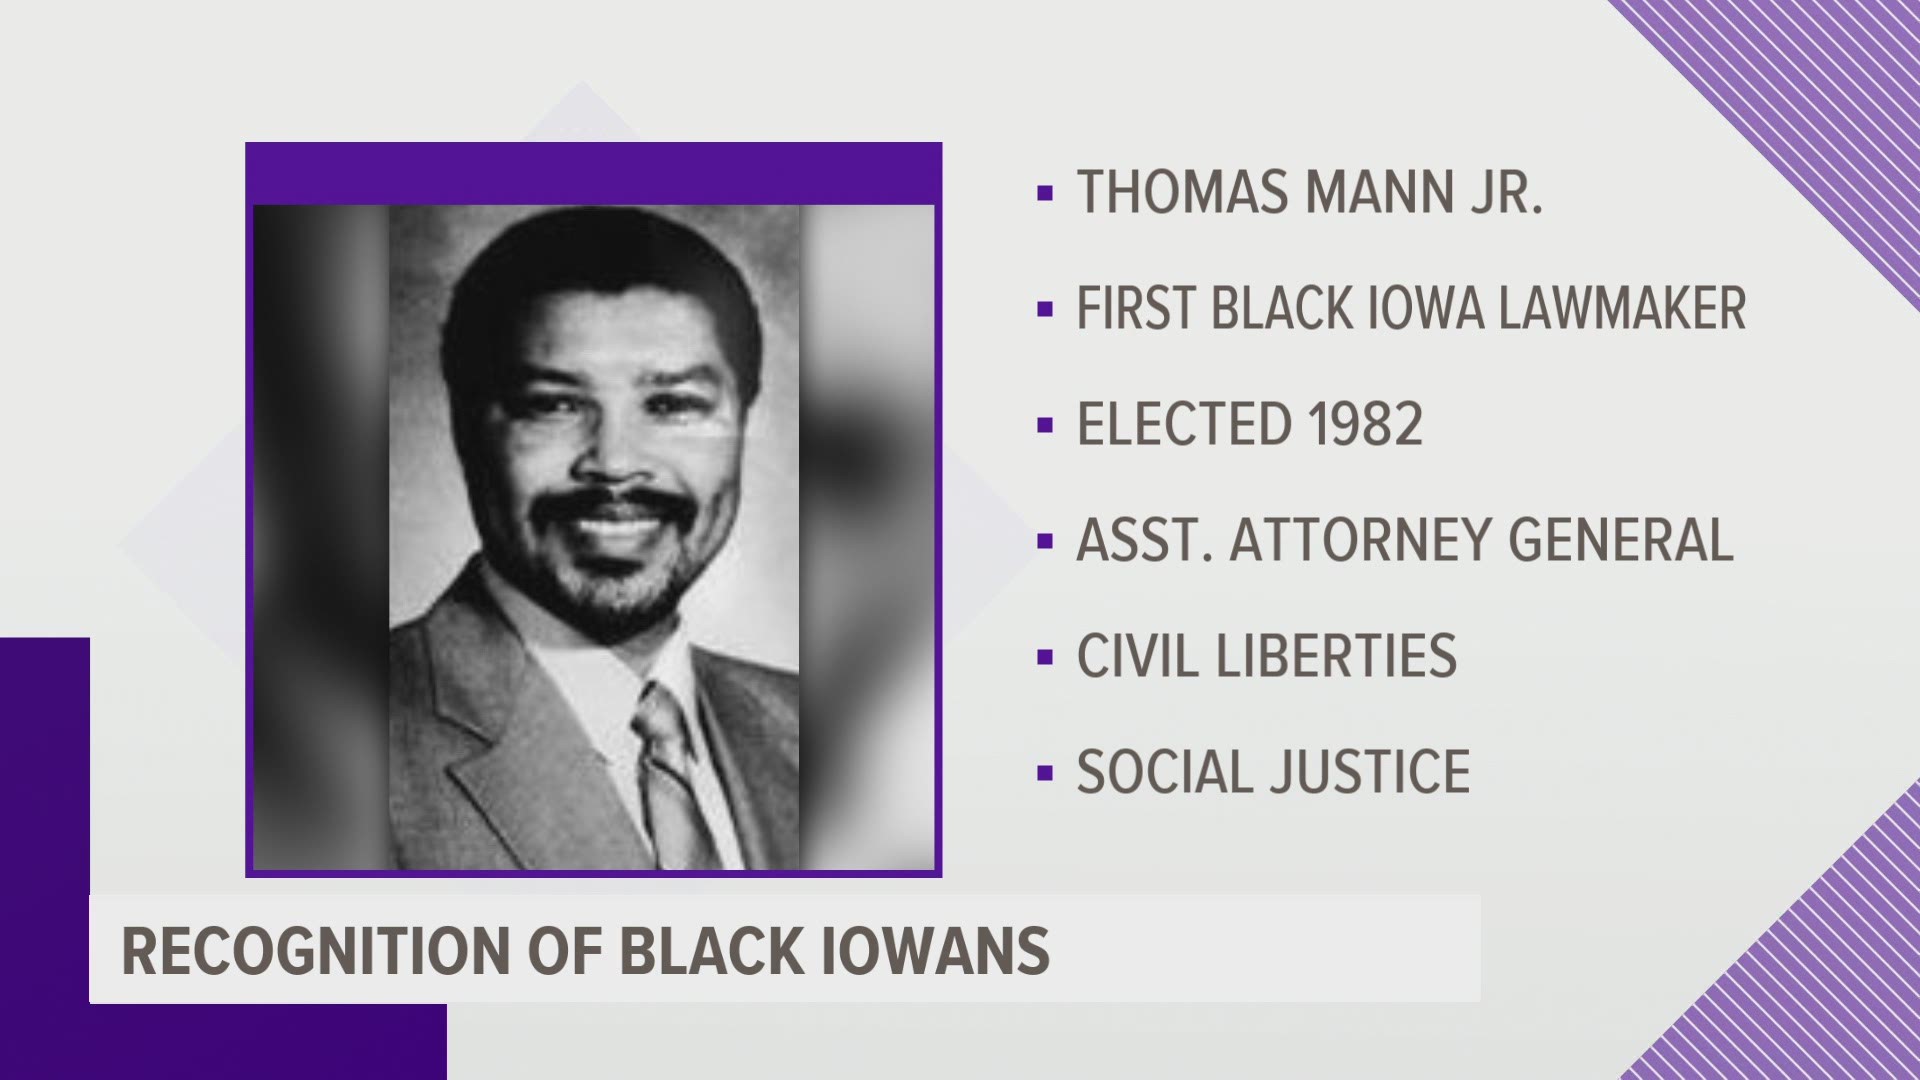 Mann Jr. was elected as Iowa's first Black state senator in 1982.